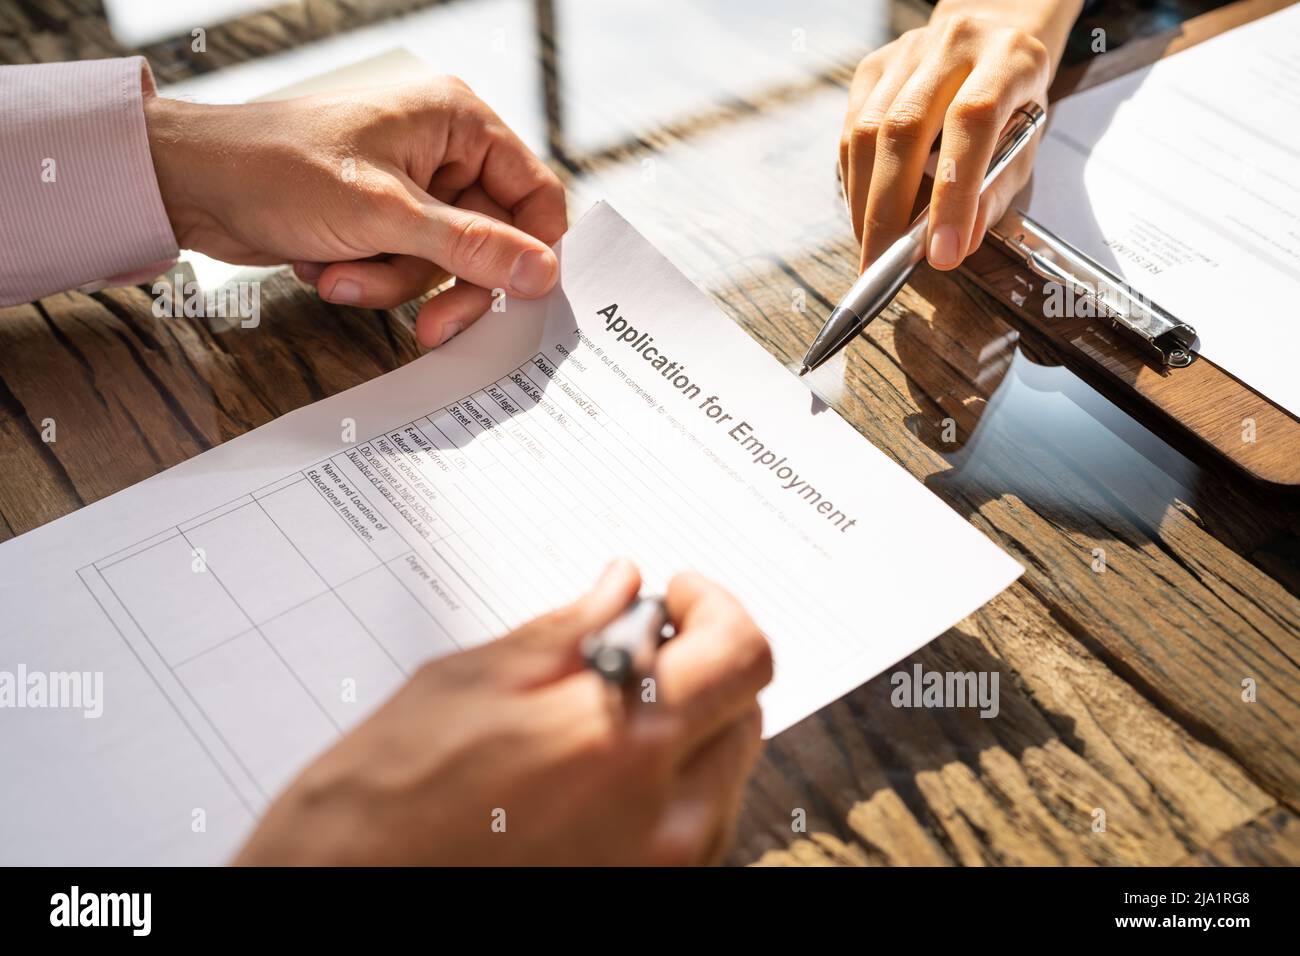 Job Interview And Unemployment. Hire Applicant. Application Form Stock Photo